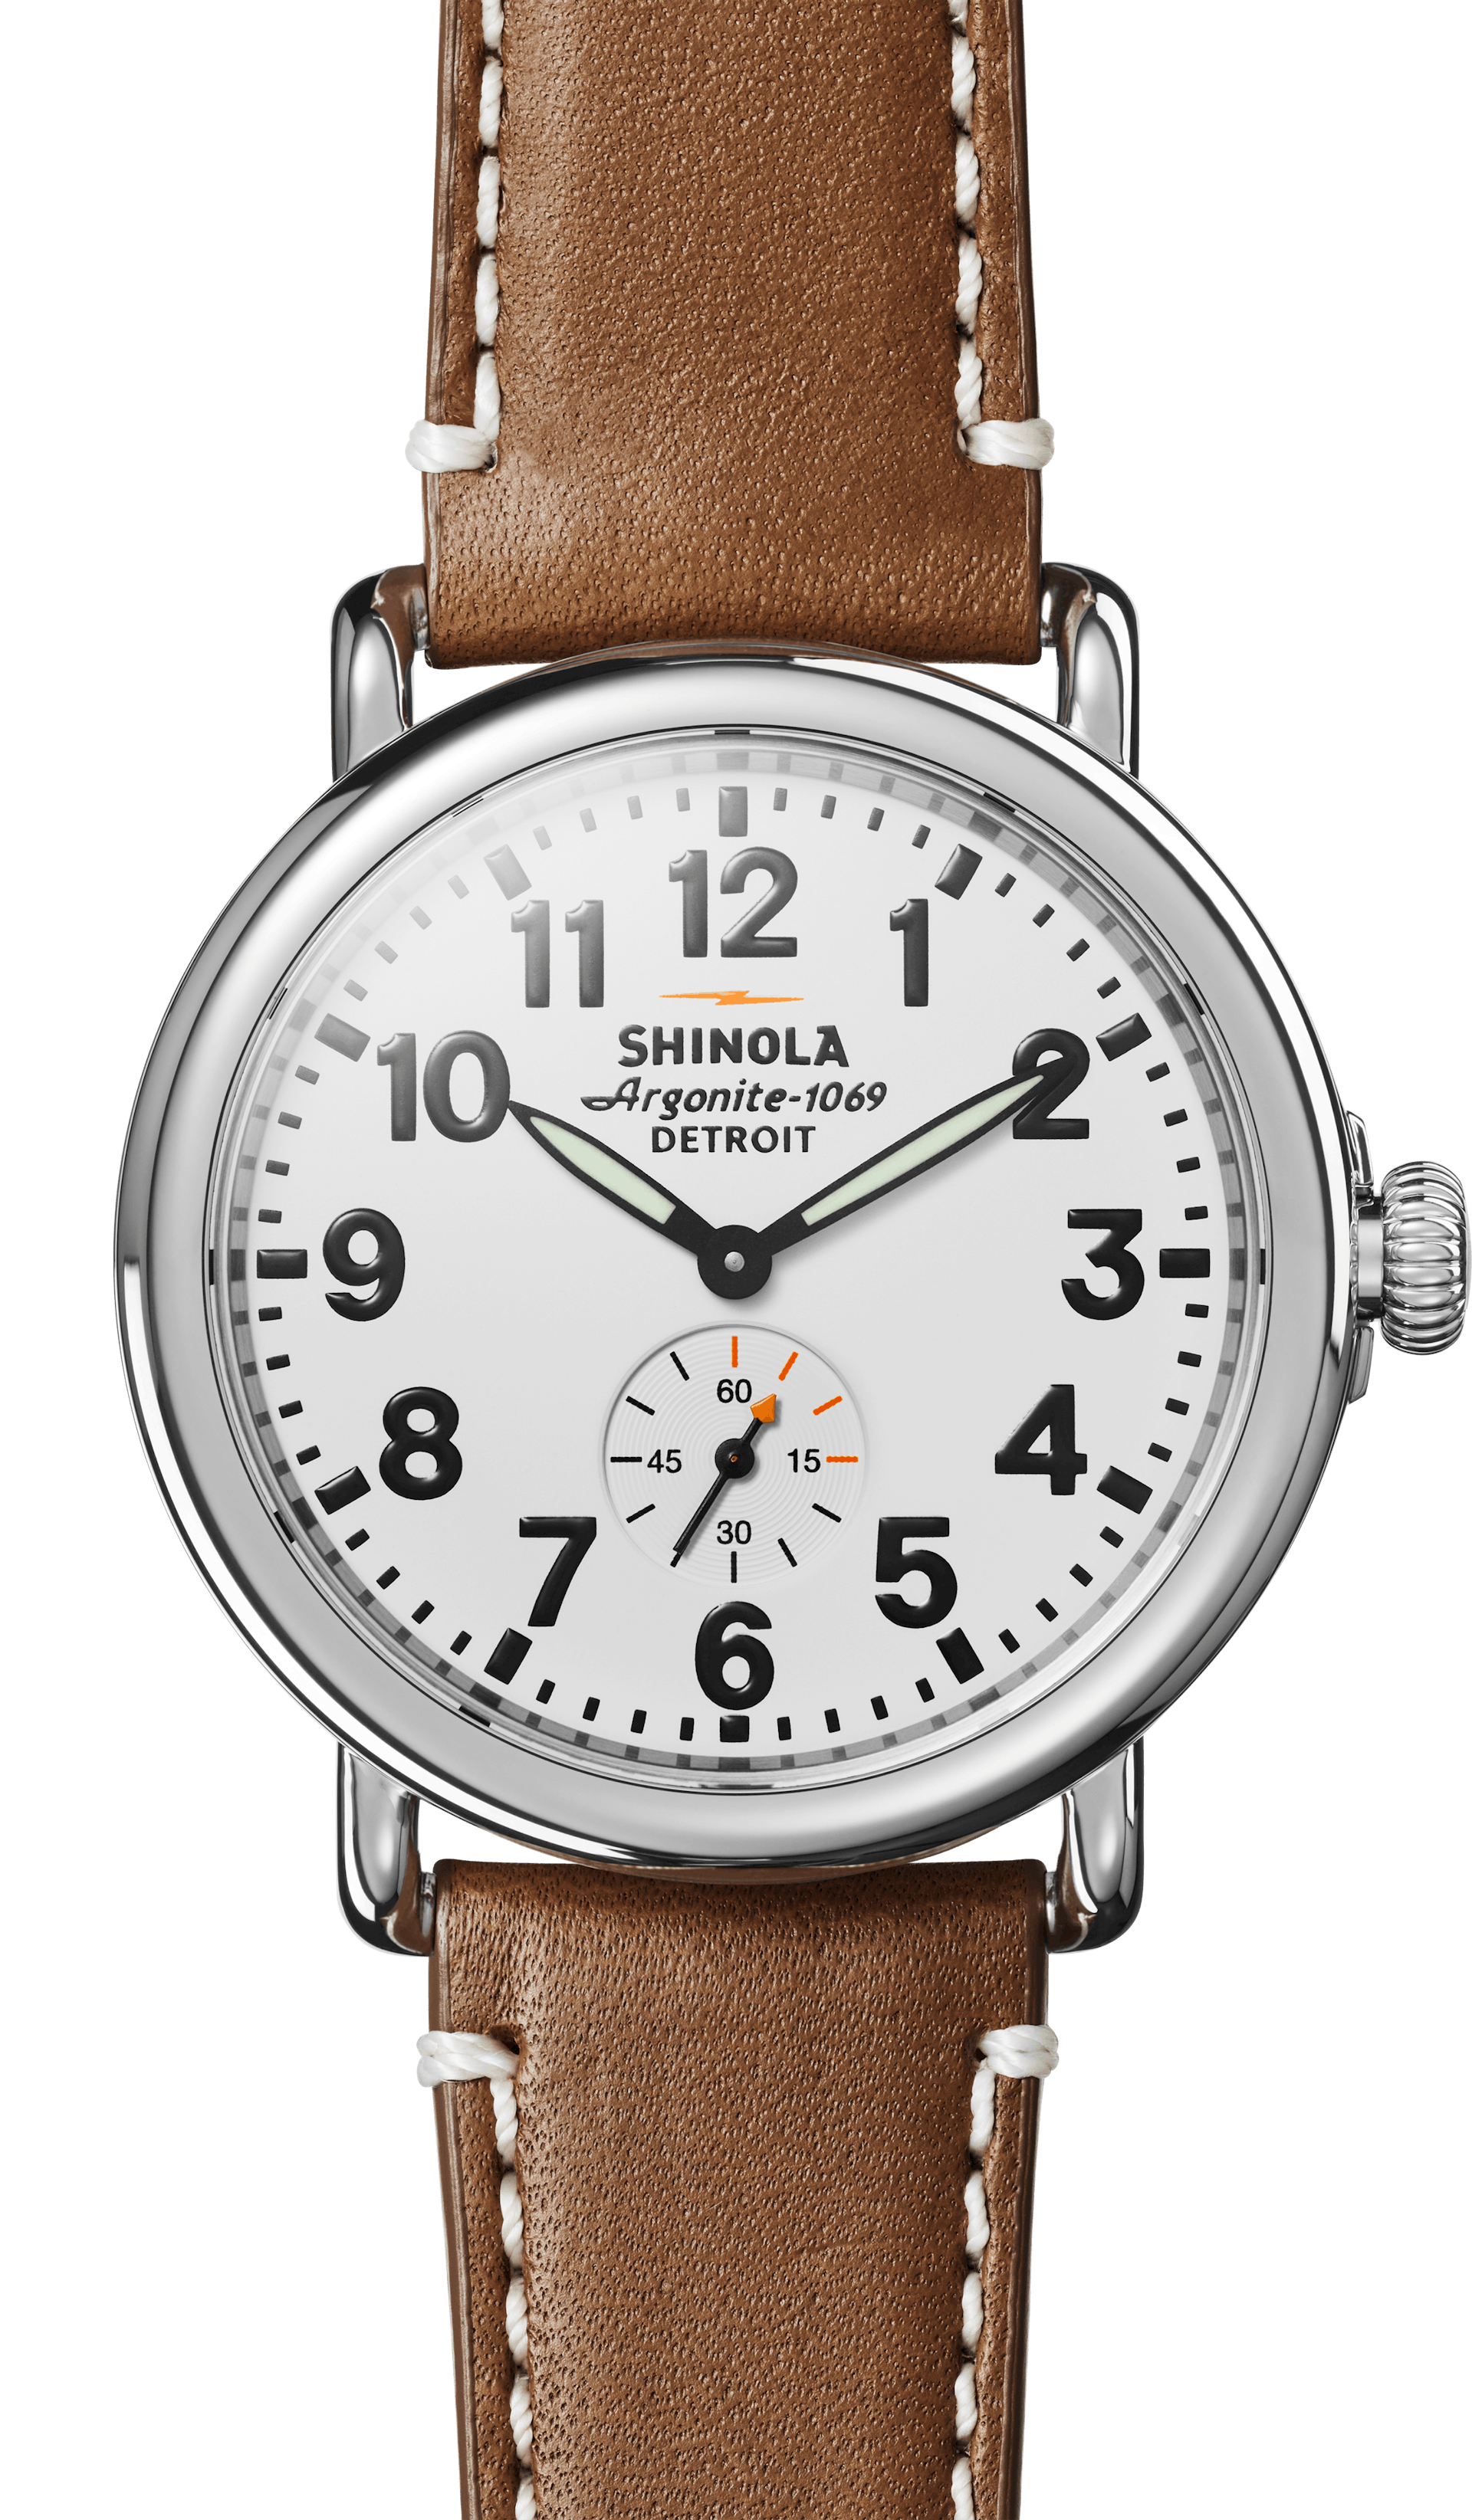 Detroit Auto Show and Shinola Announce New Partnership - Shinola's New  Timepiece is Official Countdown Clock of the Detroit Auto Show